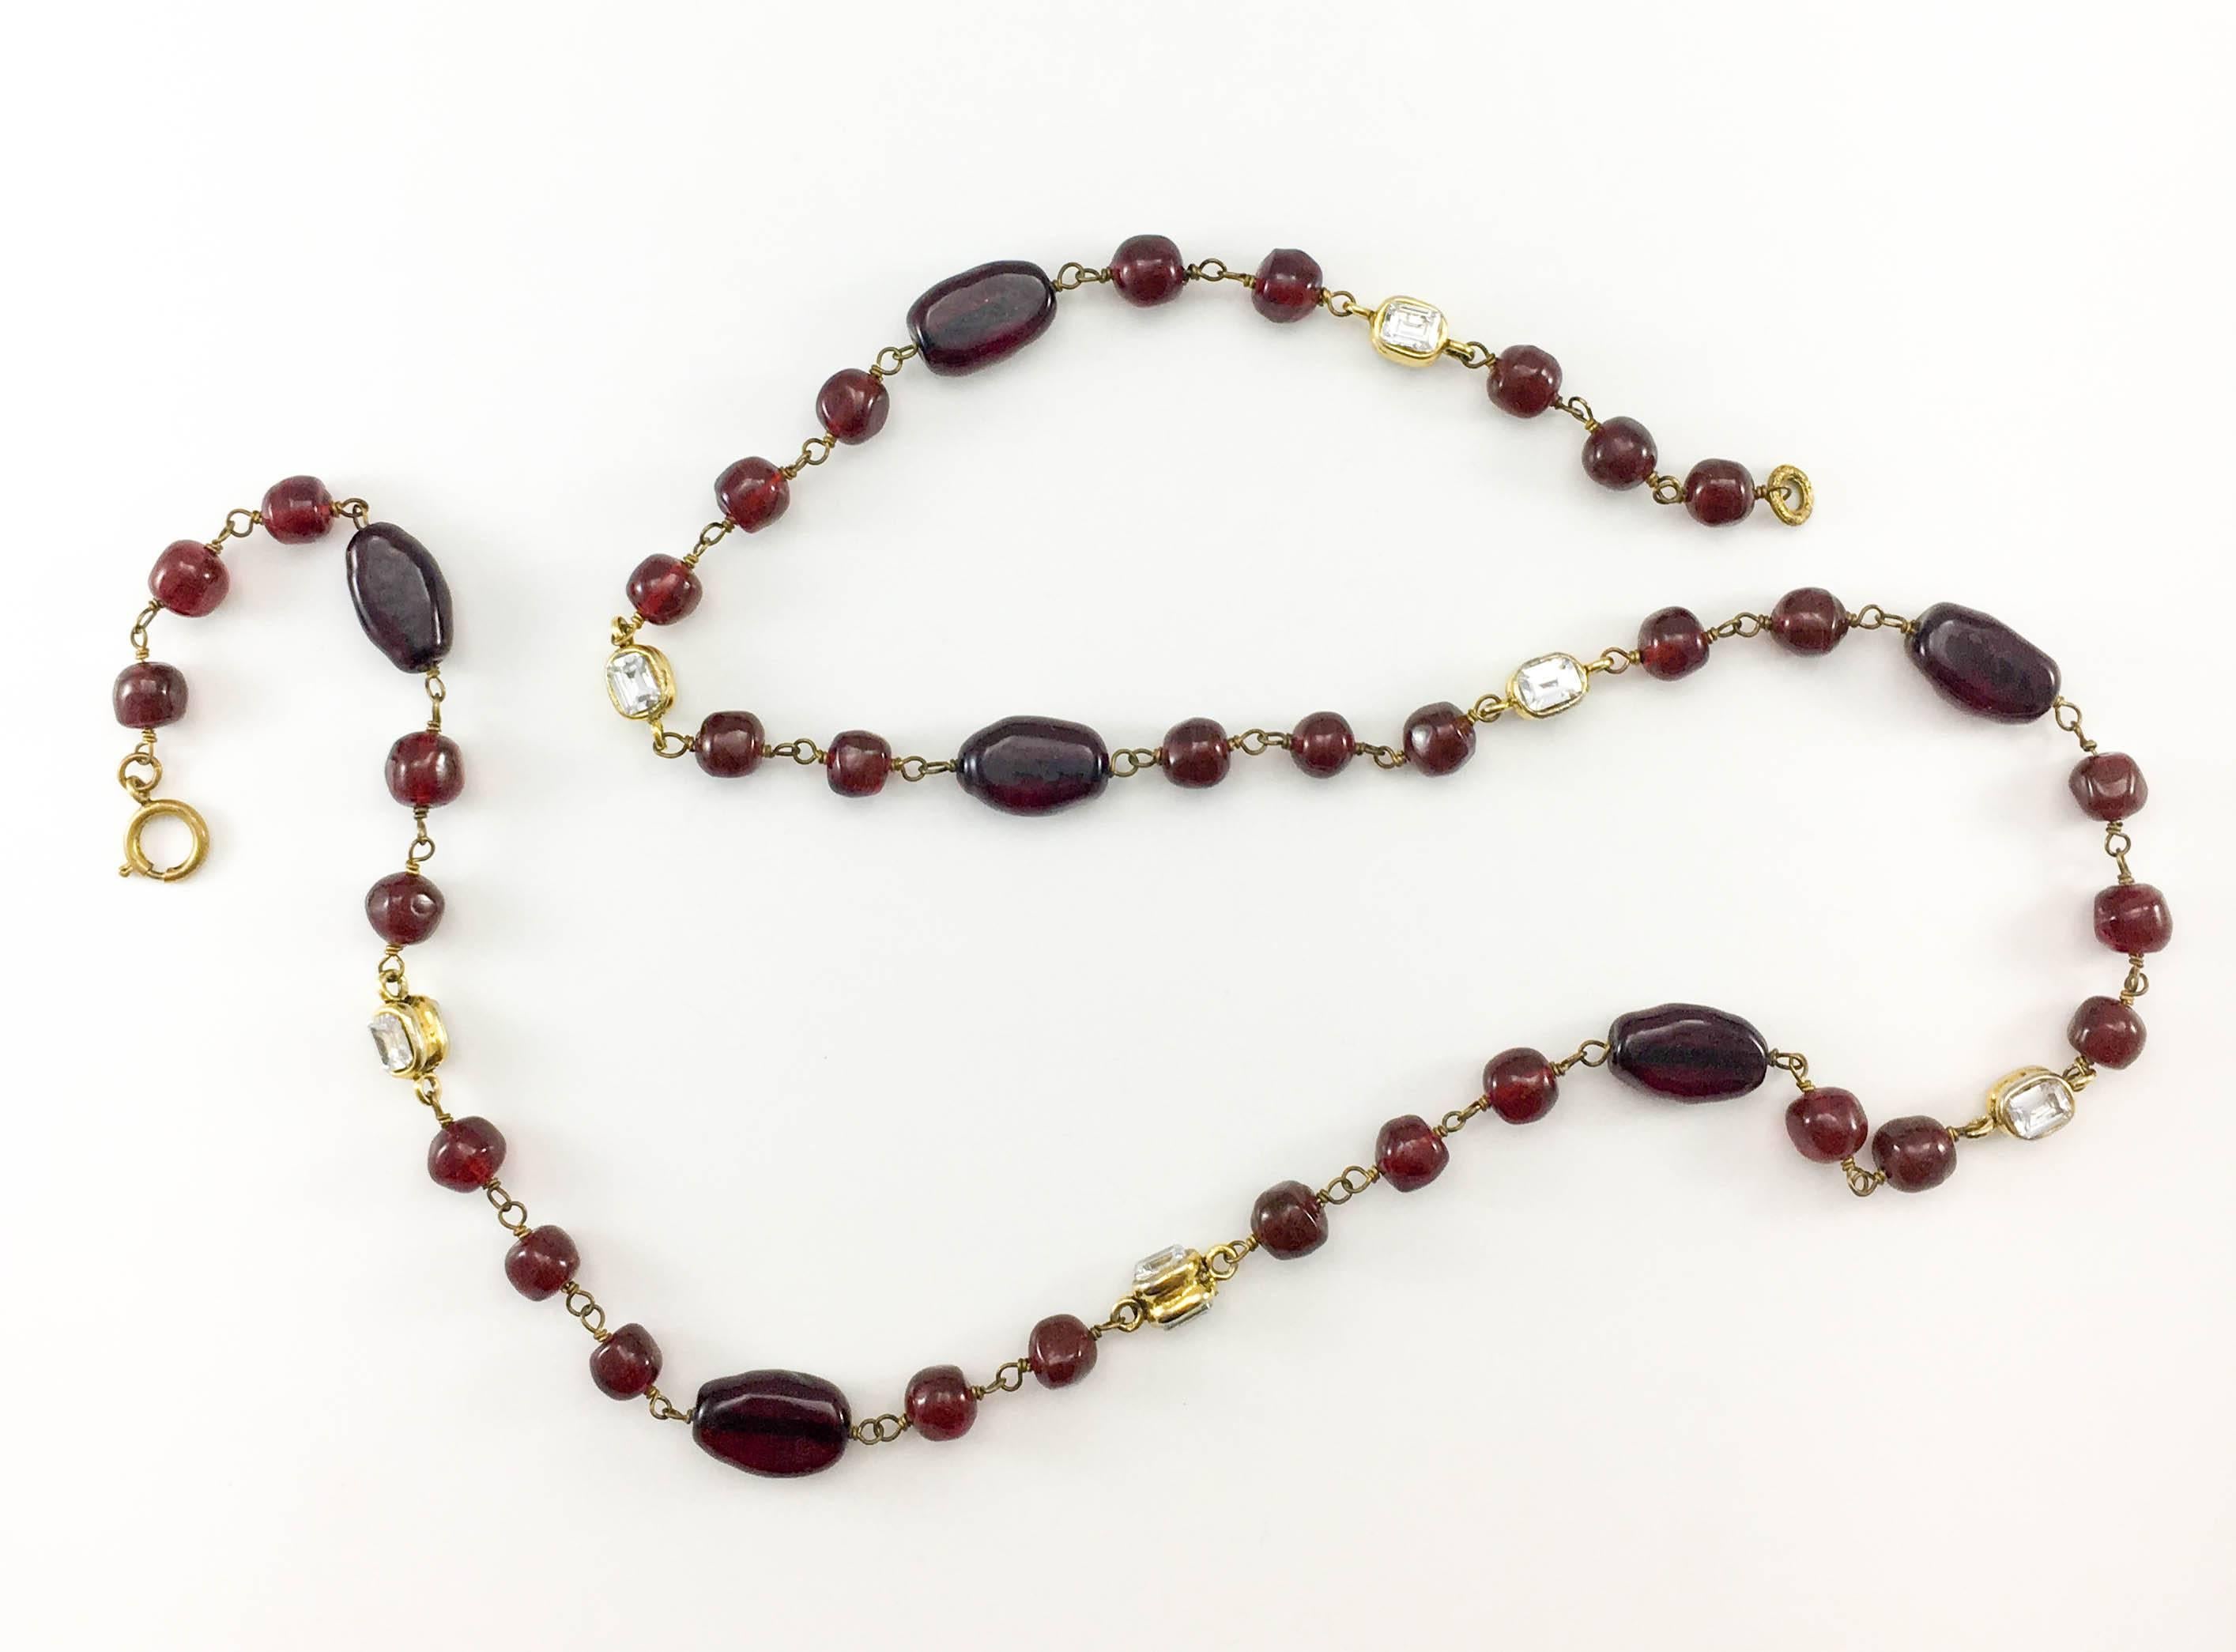 Vintage Chanel Red Gripoix Necklace. This beautiful necklace by Chanel was crafted in the 1970’s. The design consists of organically shaped red gripoix beads and rectangular crystals in gilt settings. Versatile, it can be worn as a long necklace or